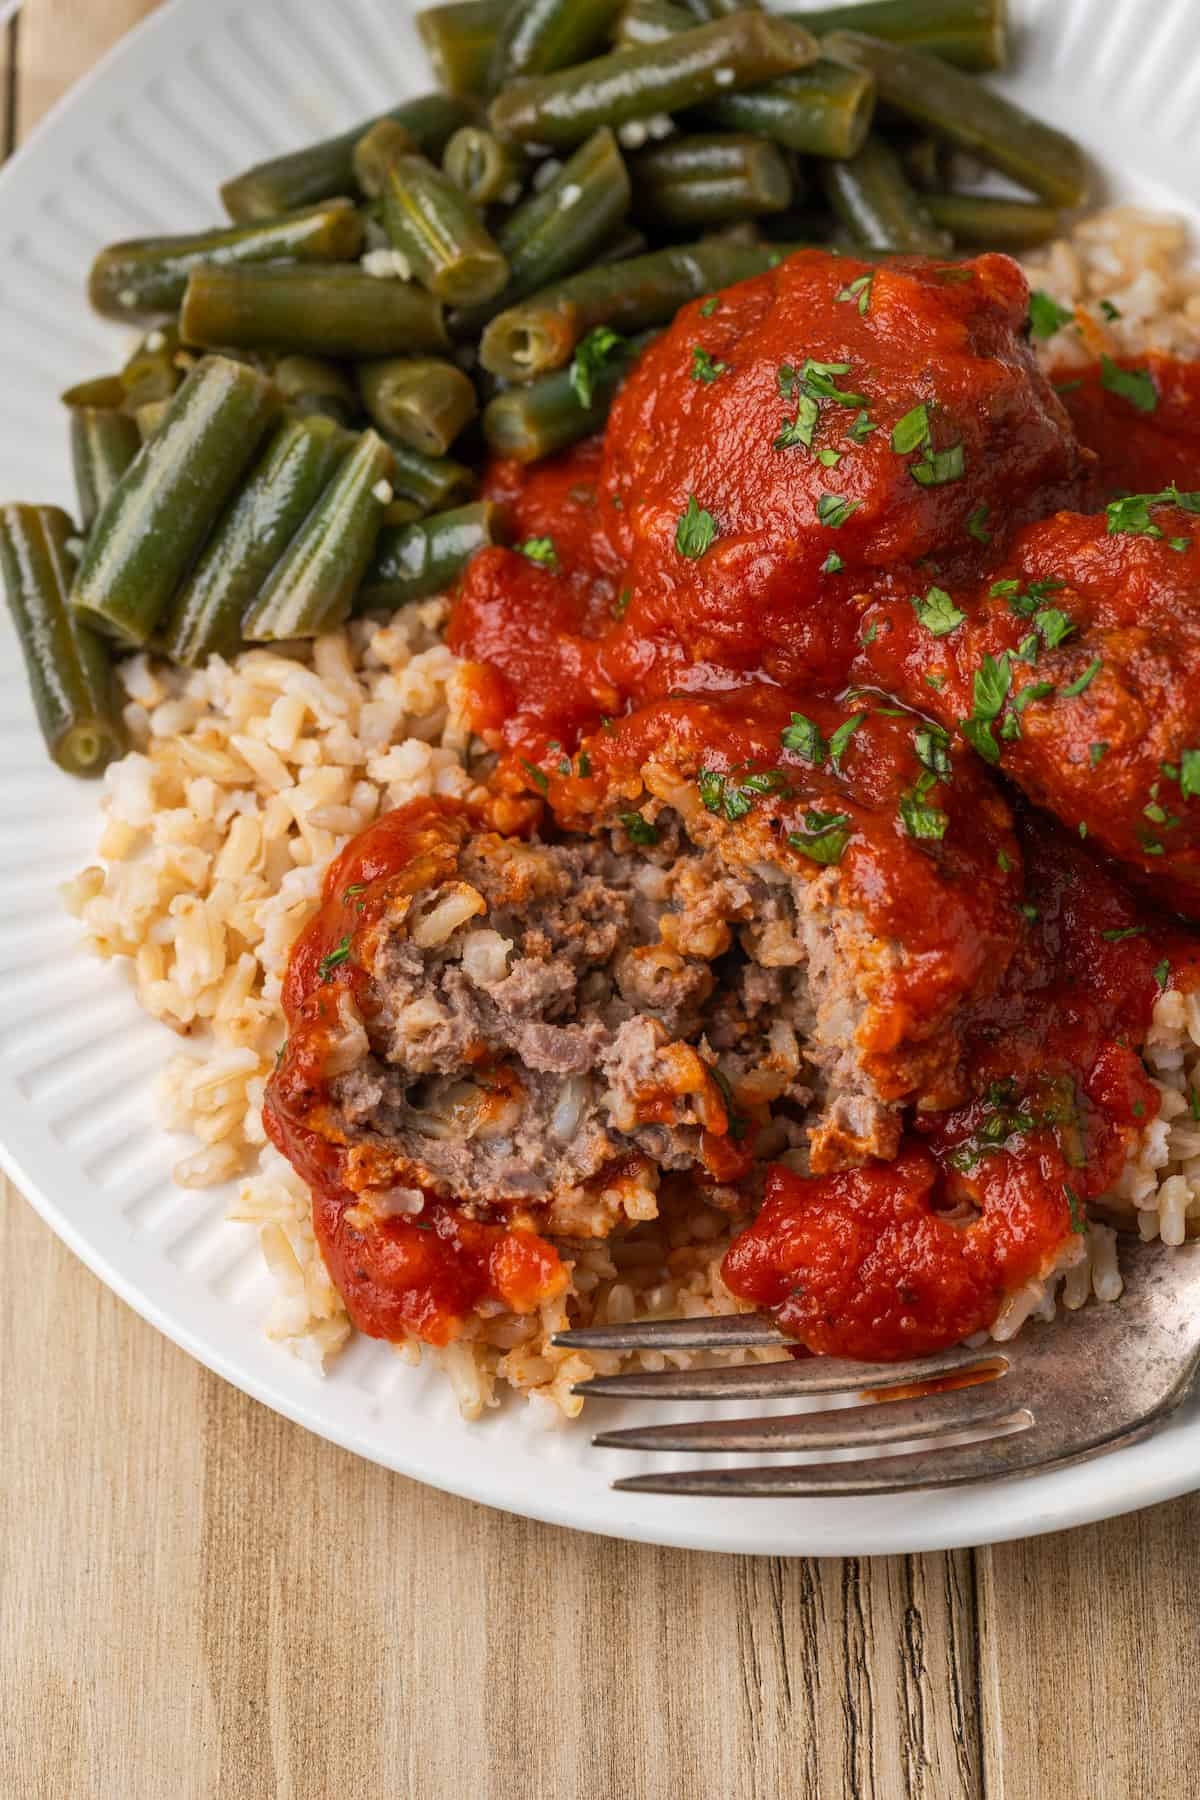 A cut porcupine meatball shows its meaty interior. It has a fork next to it and is served in red sauce over rice and green beans.